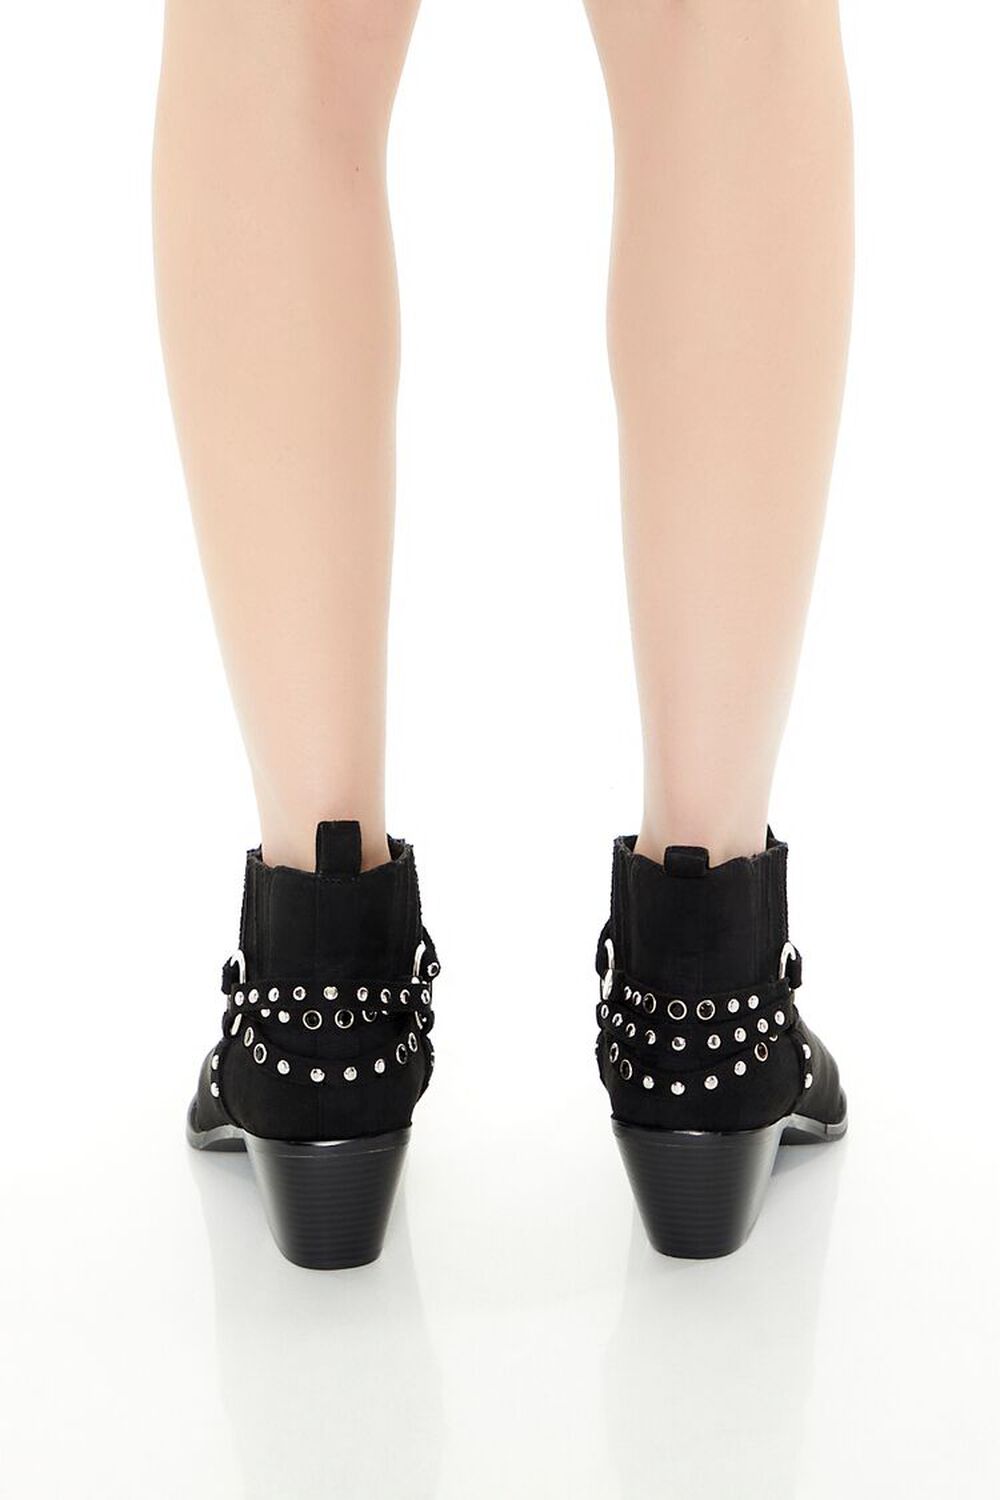 BLACK Studded Faux Suede Booties, image 3